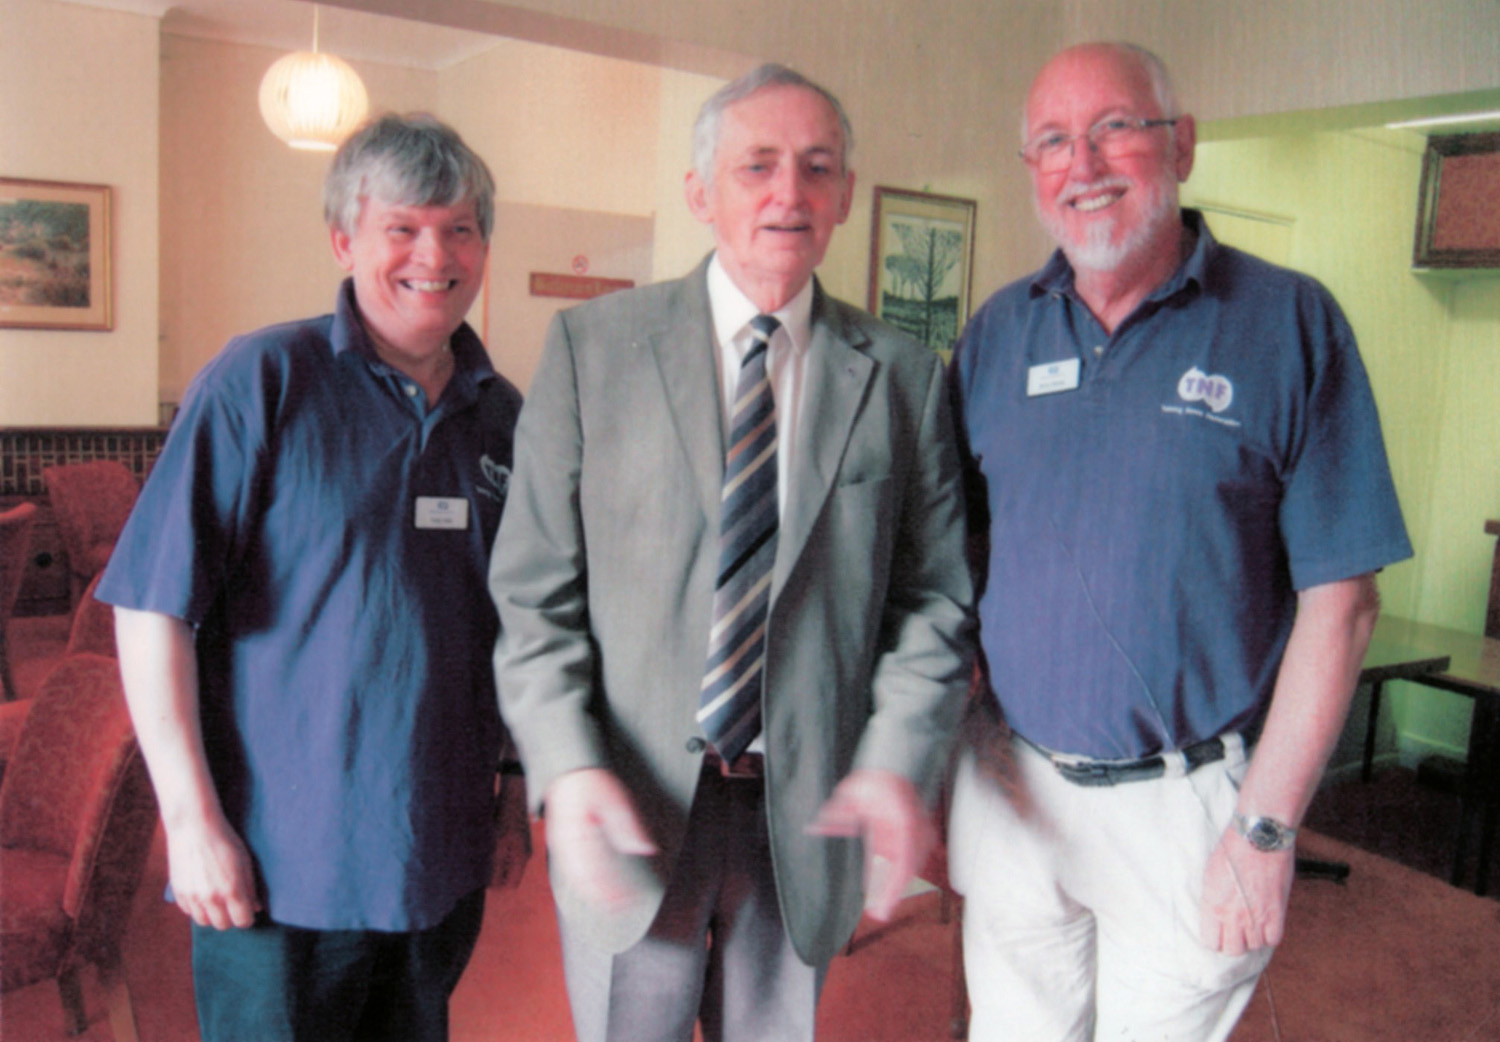 PATN Seminar at Titchfield 23 June 2012. Tony Vale, Mike Wood and Brian Watts from TN Federation